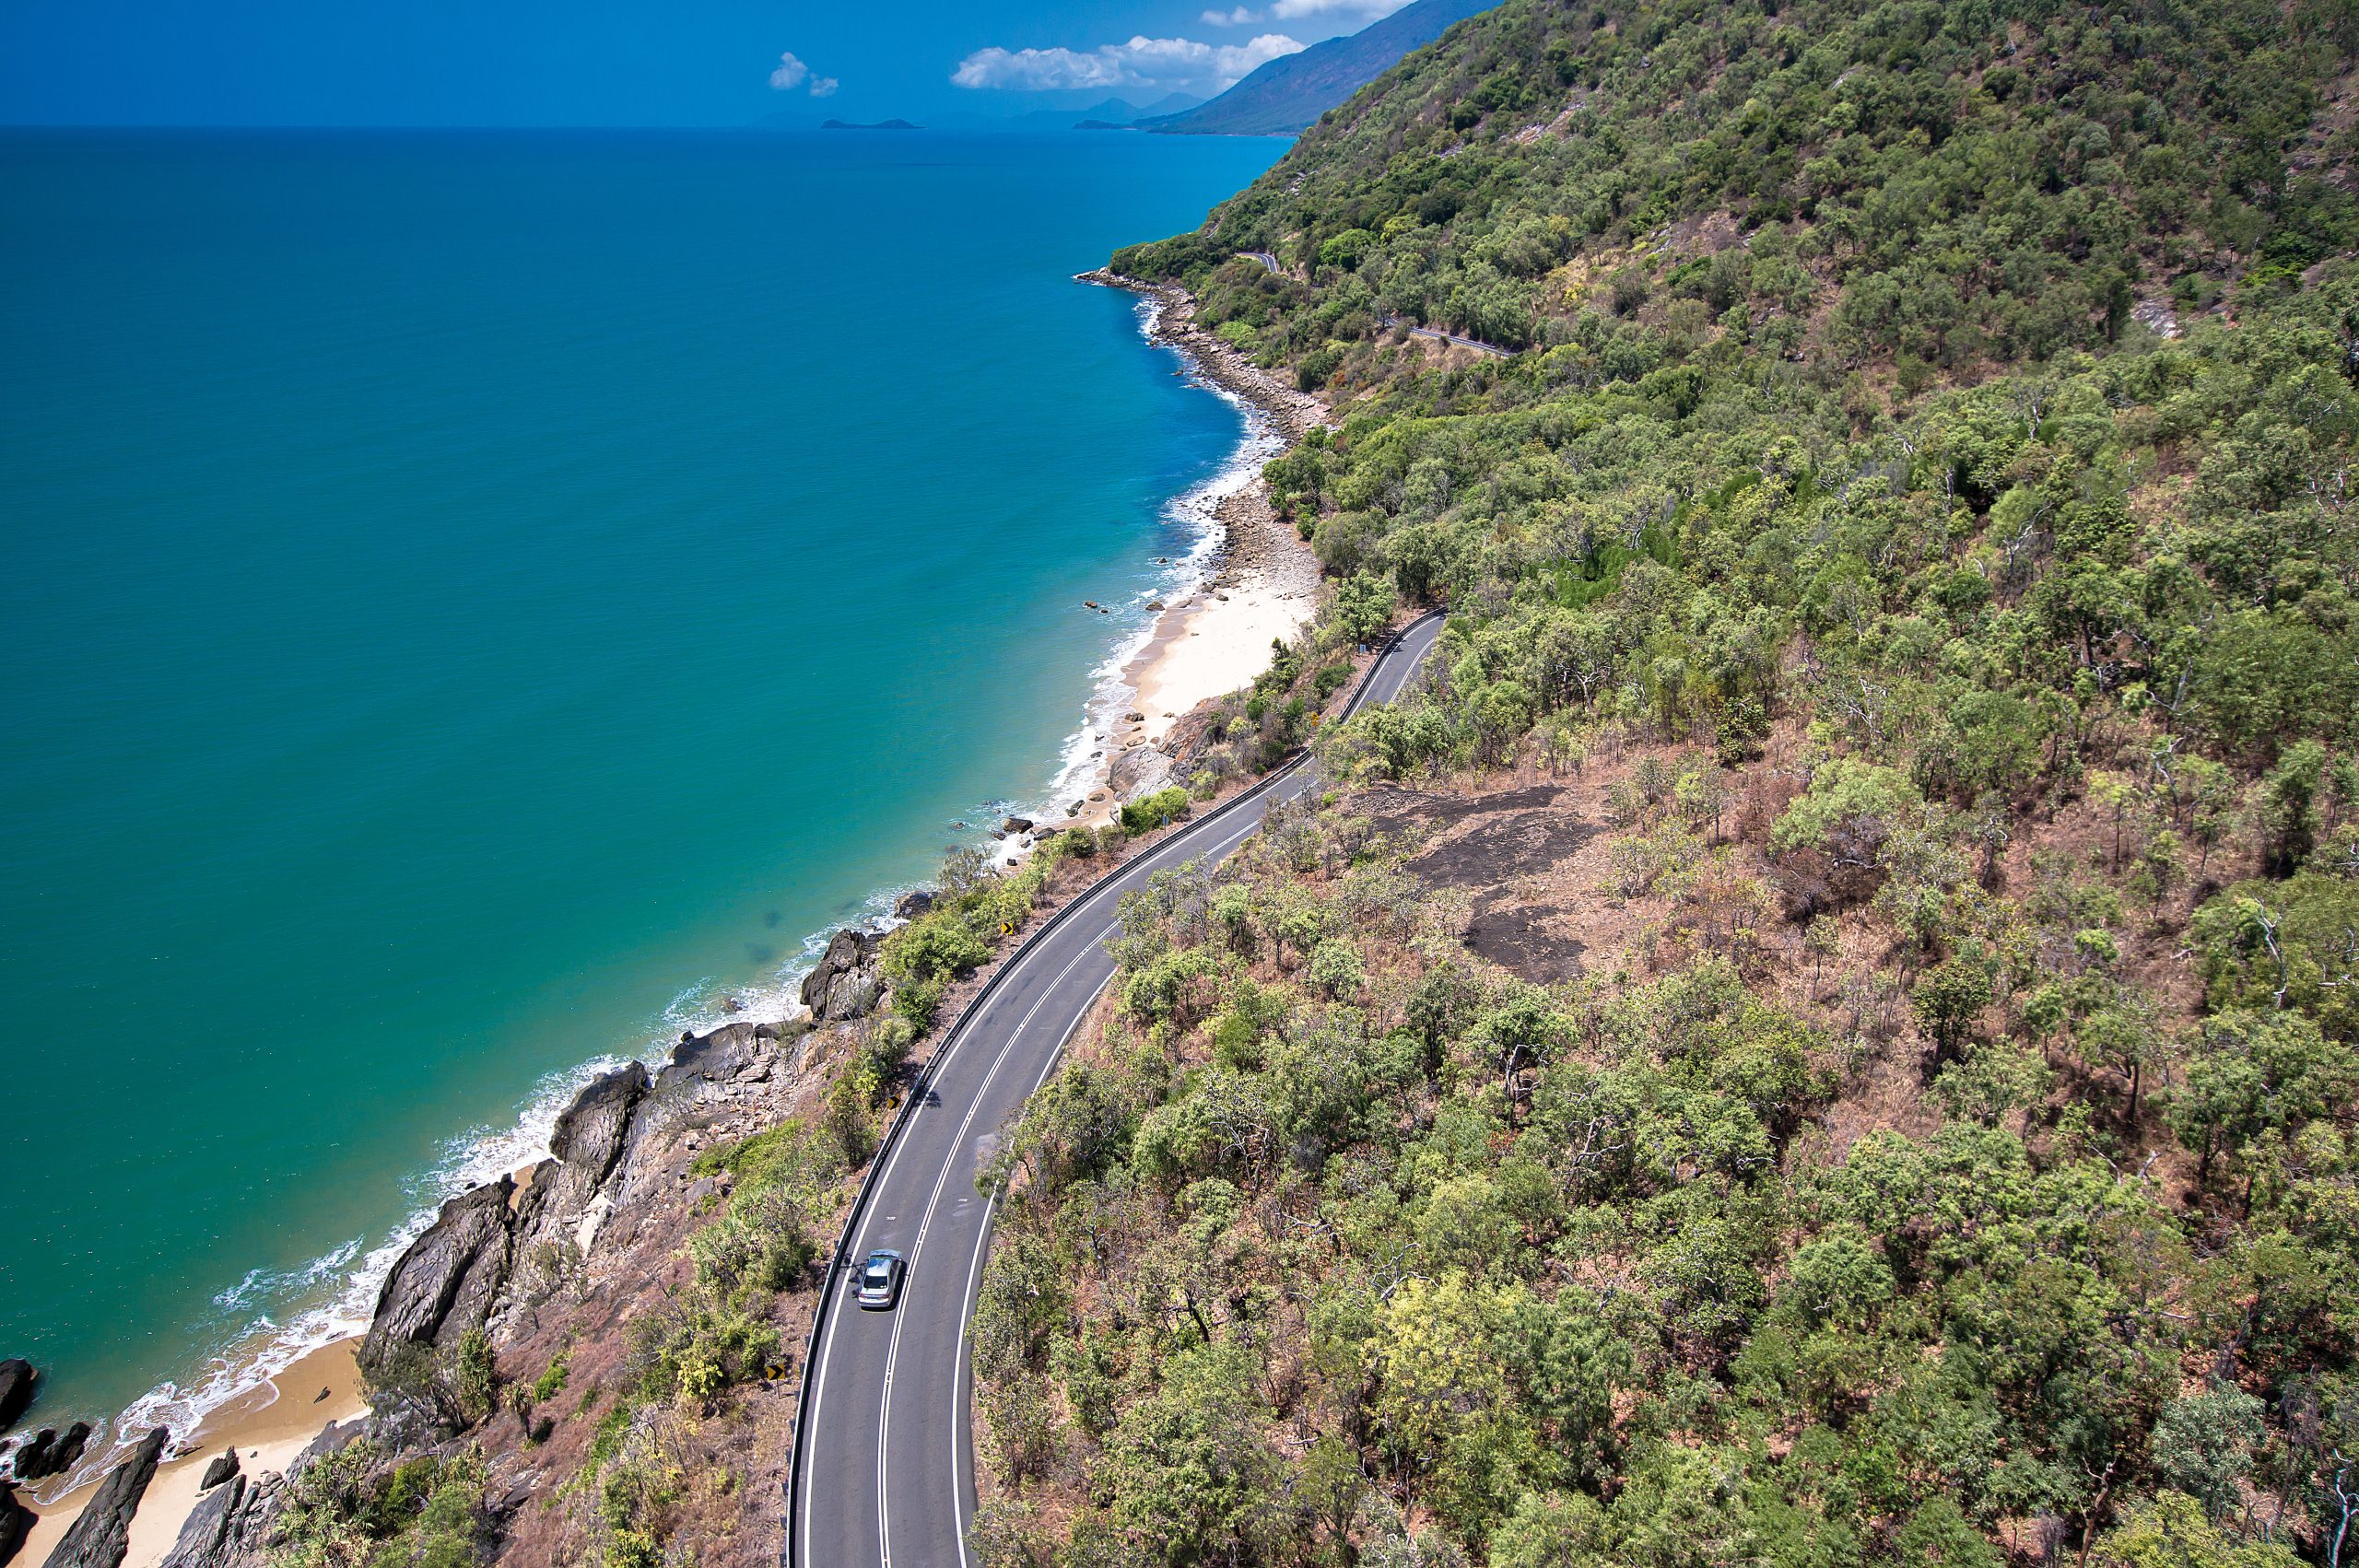 Add the Great Barrier Reef Drive to your road trip bucket list